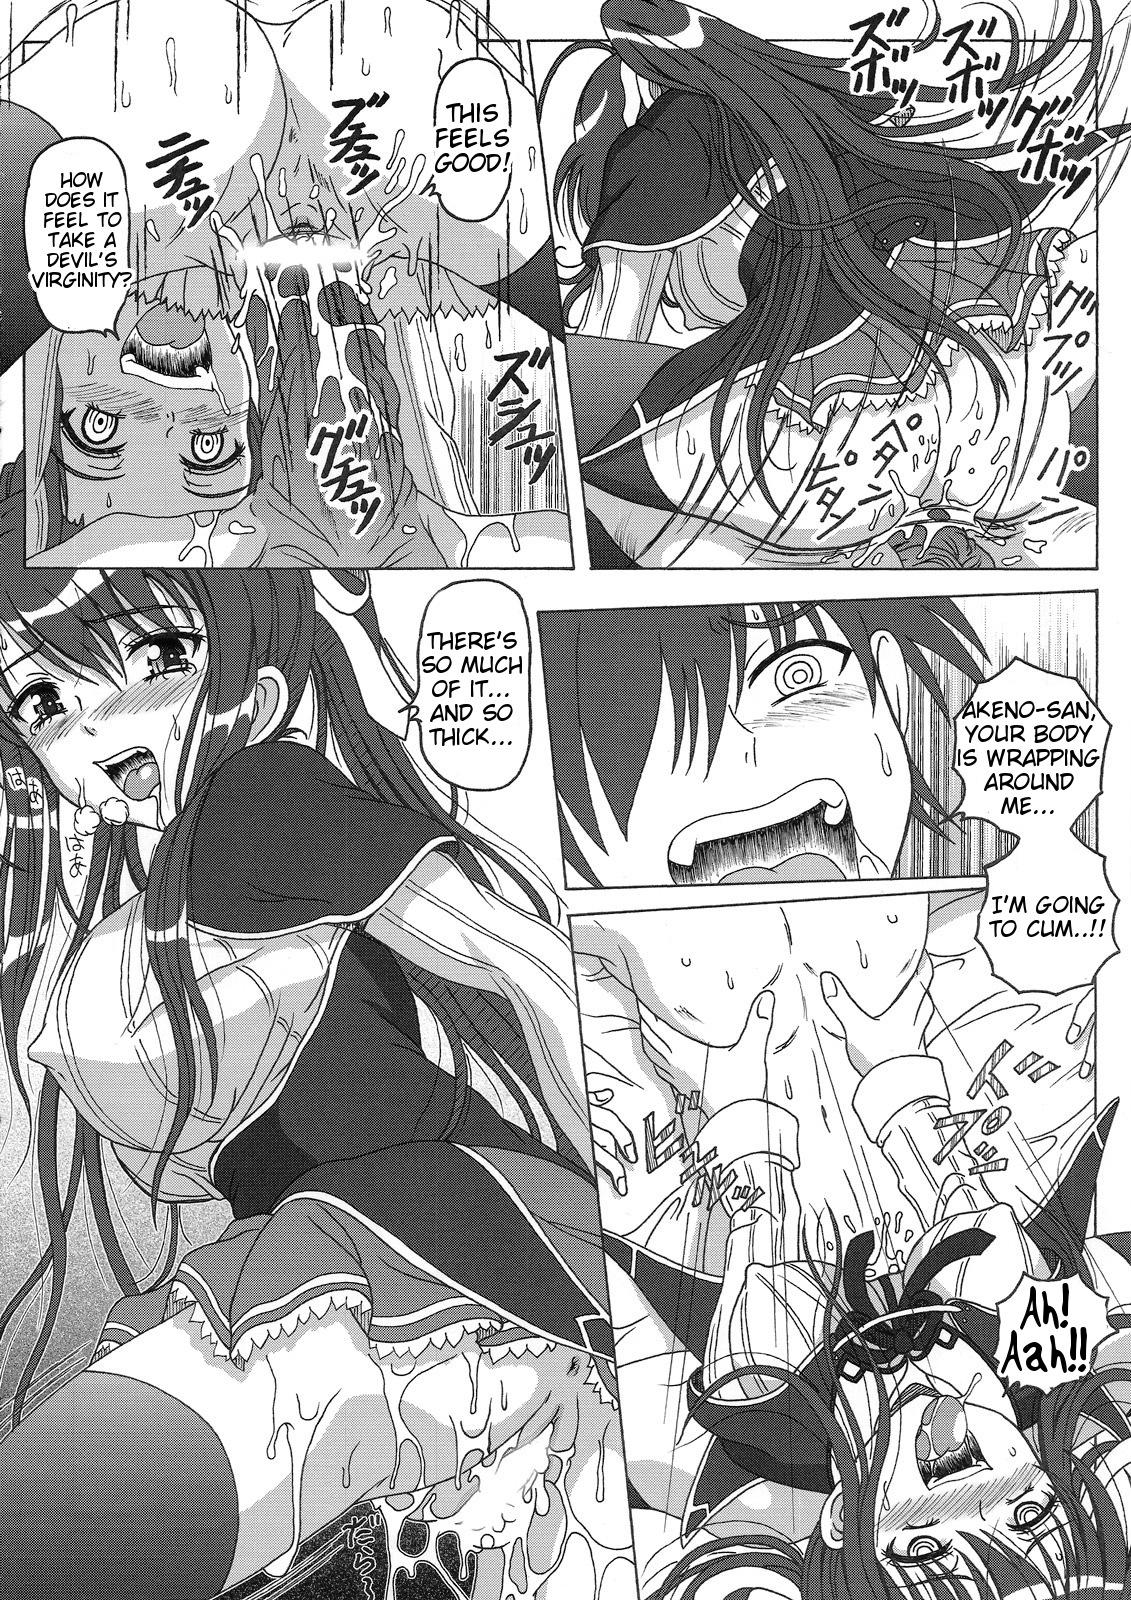 Old Young Seinen hana to ribon 57. 5 Paisukūru DxD - Highschool dxd Private - Page 11